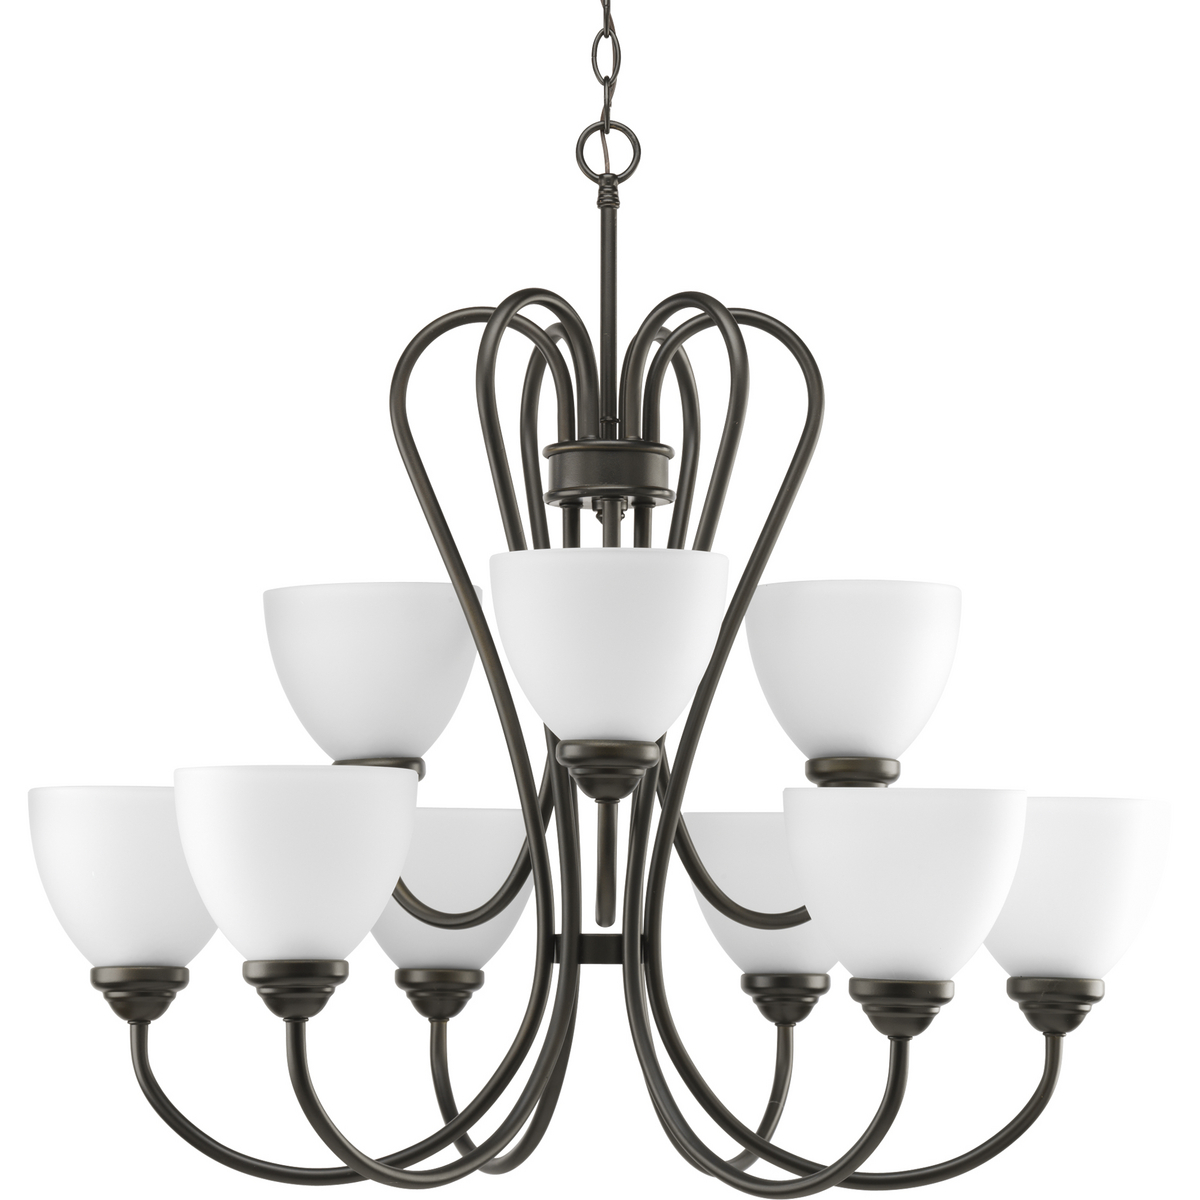 Nine-light, 2-tier Antique Bronze chandelier with etched glass shades takes you back in time to create a pleasantly comfortable and cozy feel. The Heart Collection possesses arching forms and angles to reveal a desiring appearance. Etched glass shades have a purpose to add distinction and provide pleasing illumination to any room.